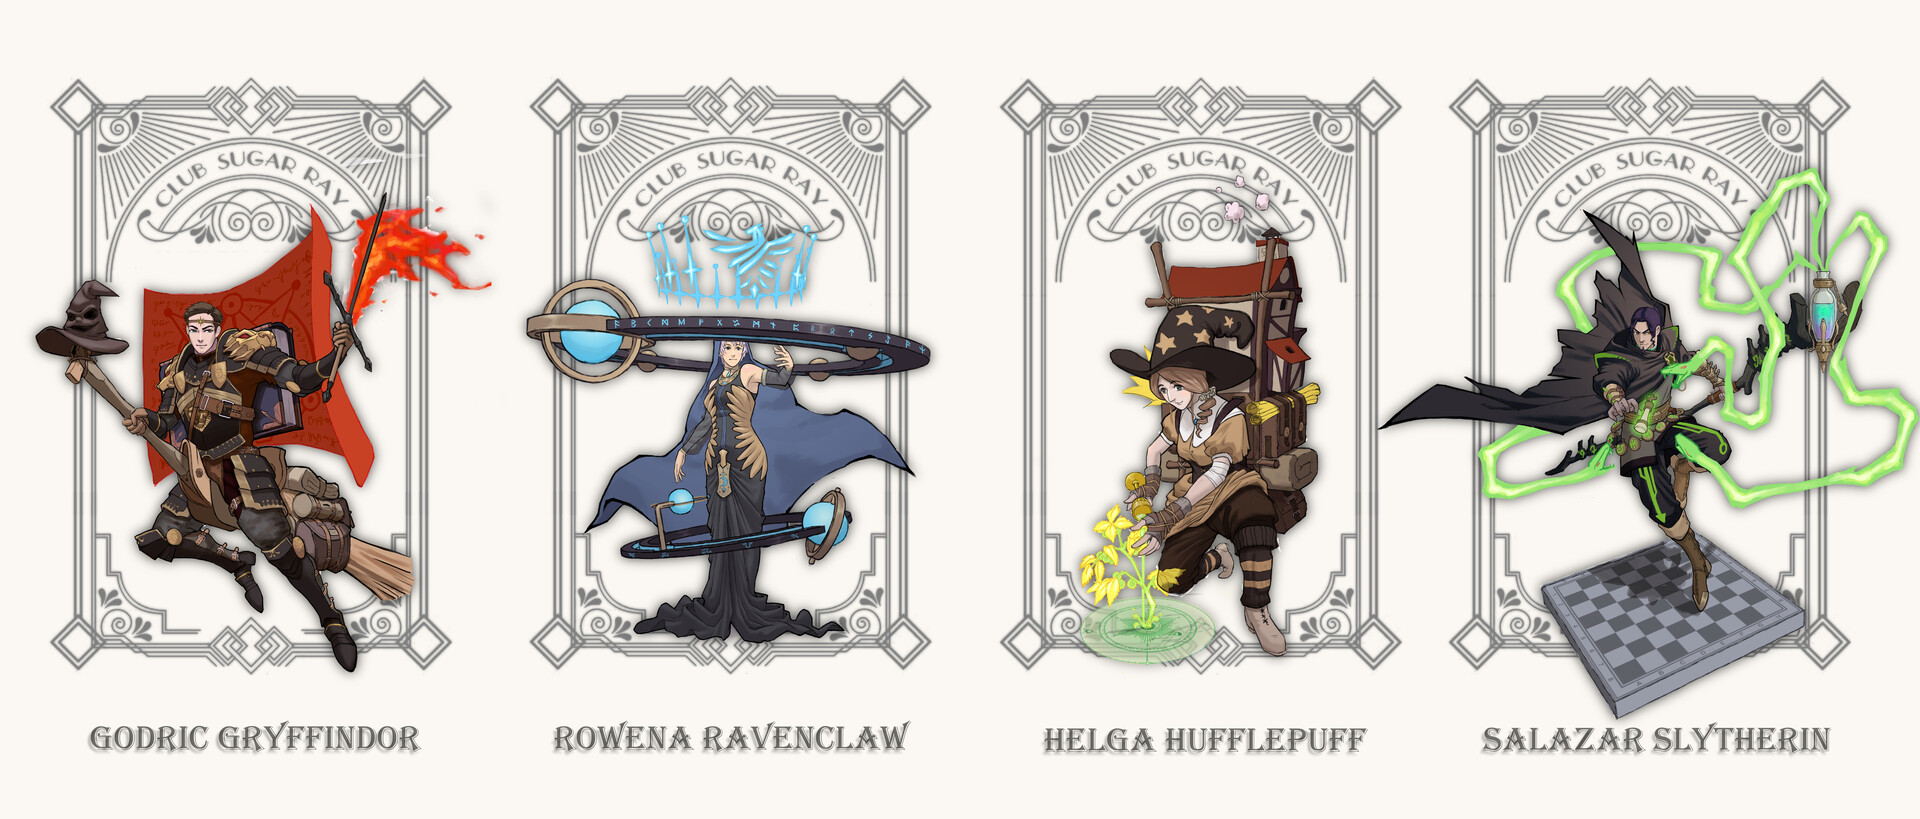 Founders of Hogwarts